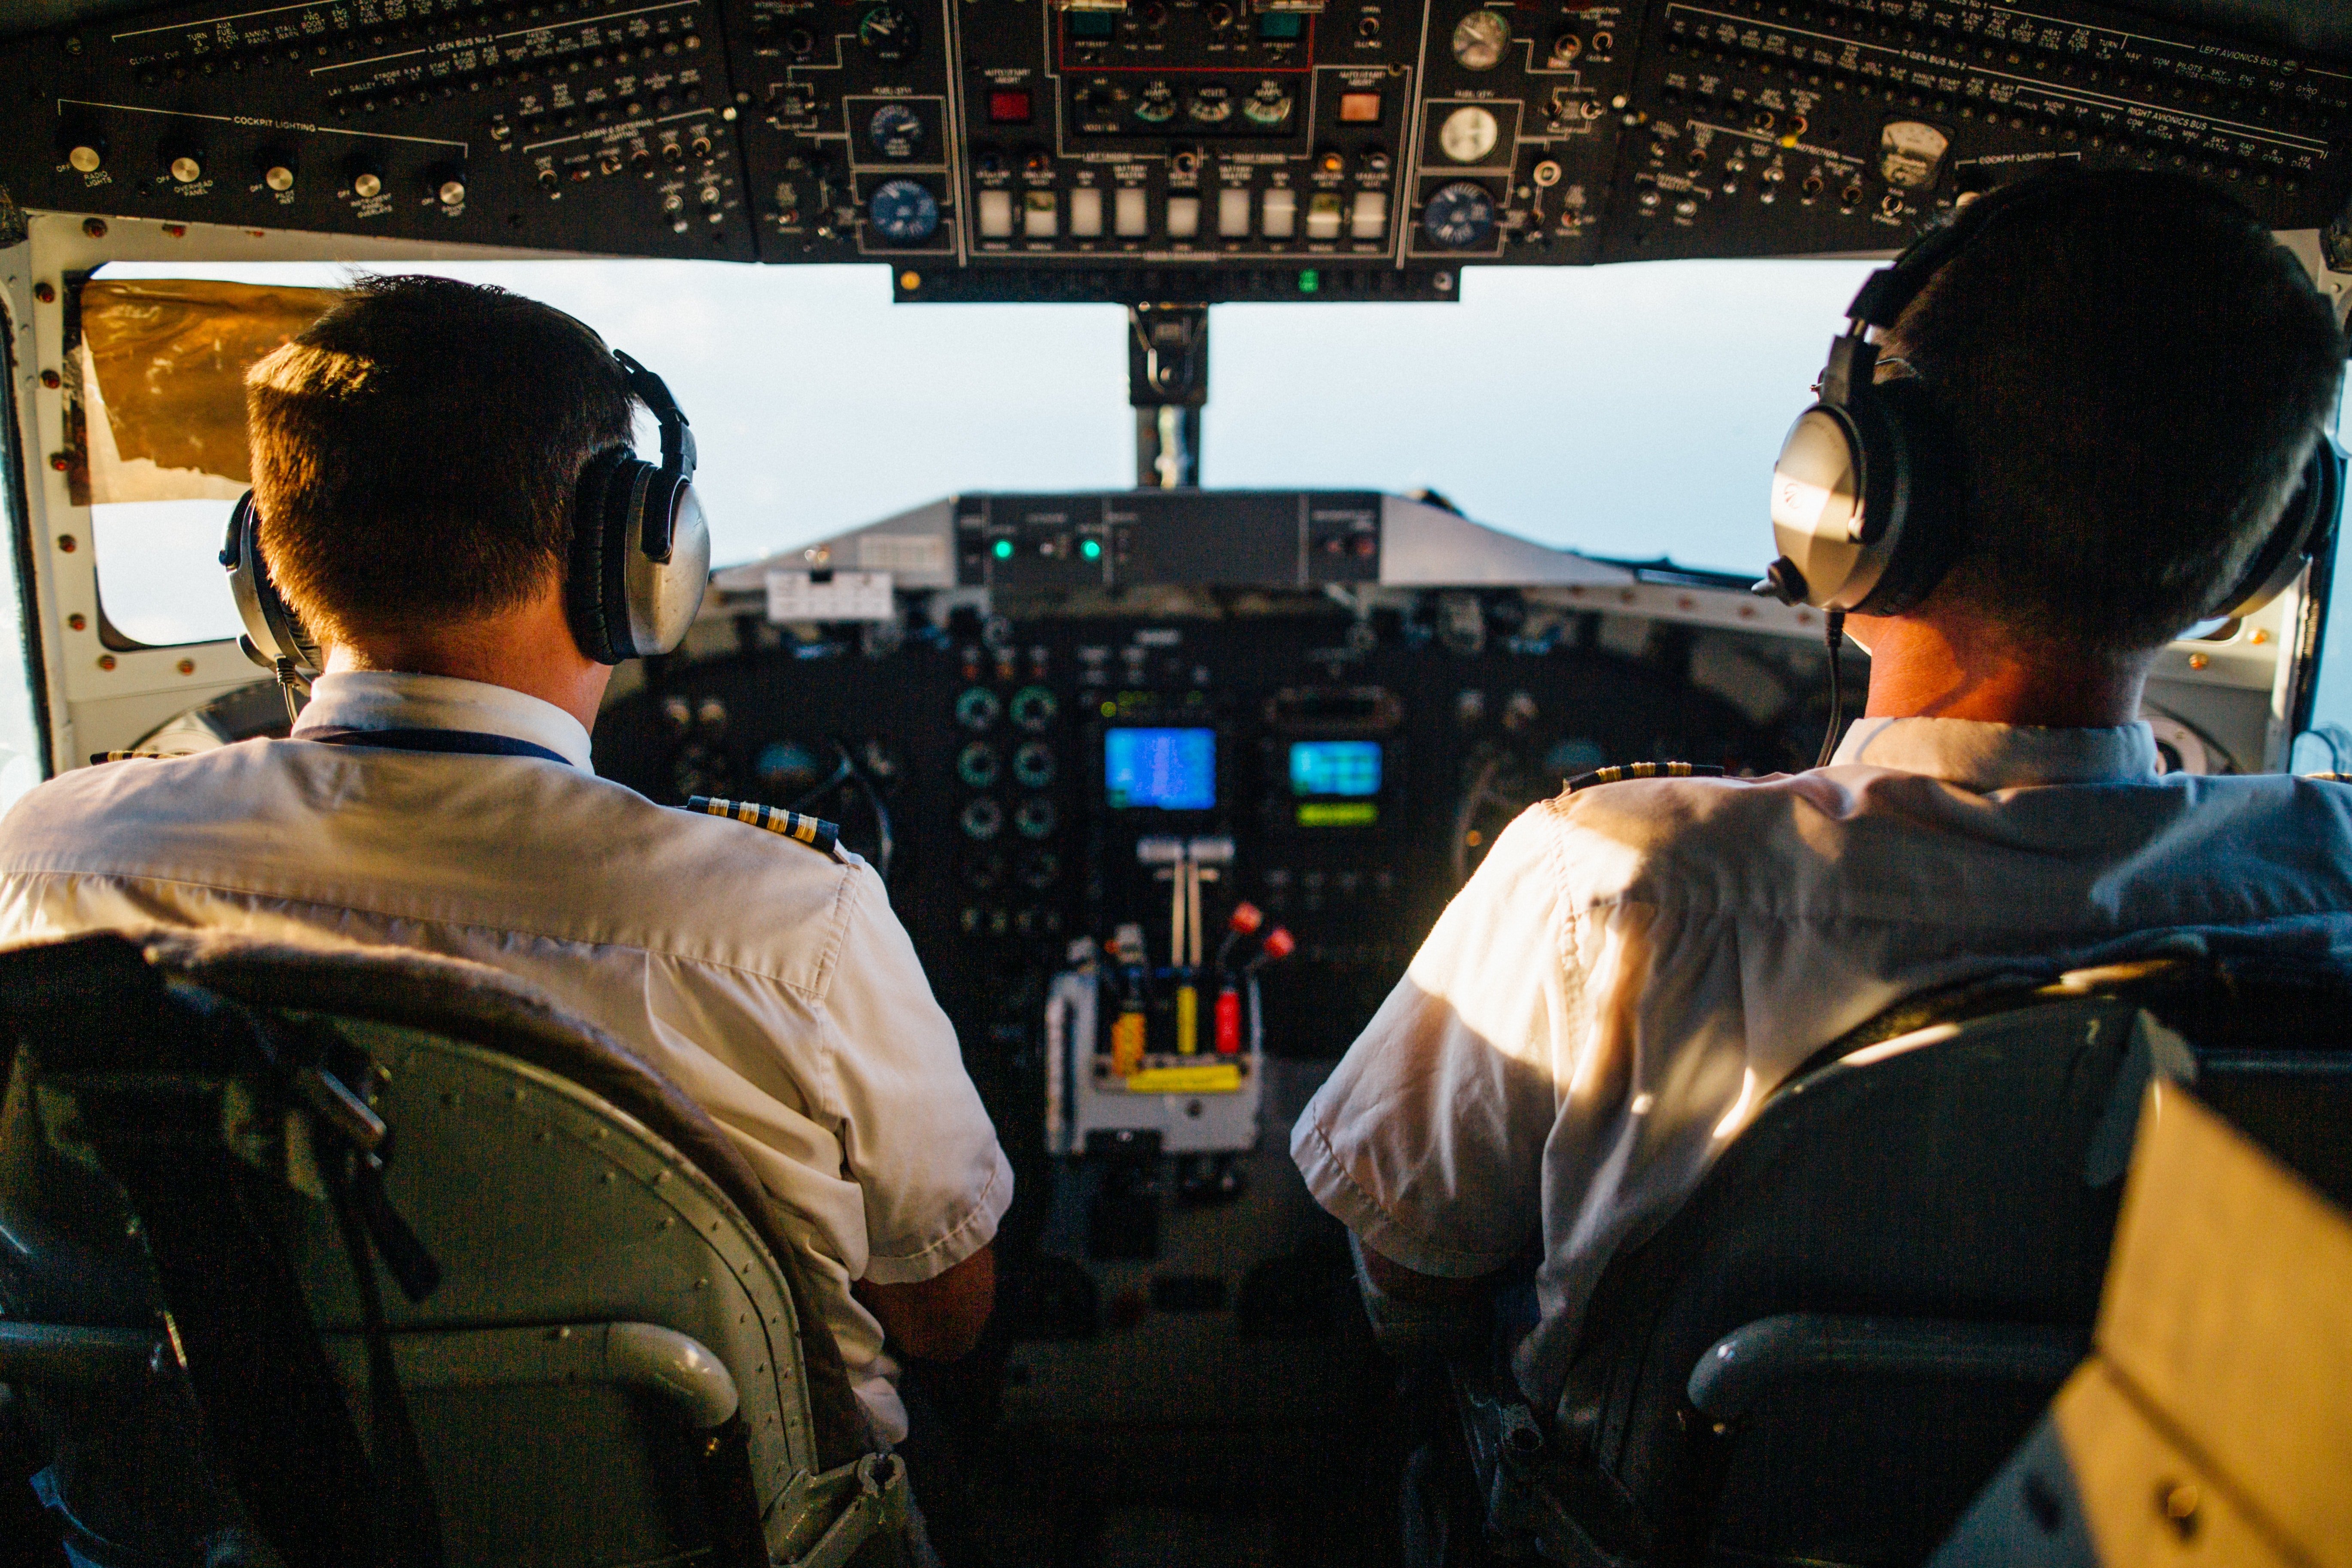 The pilot continued the announcement | Photo: Pexels